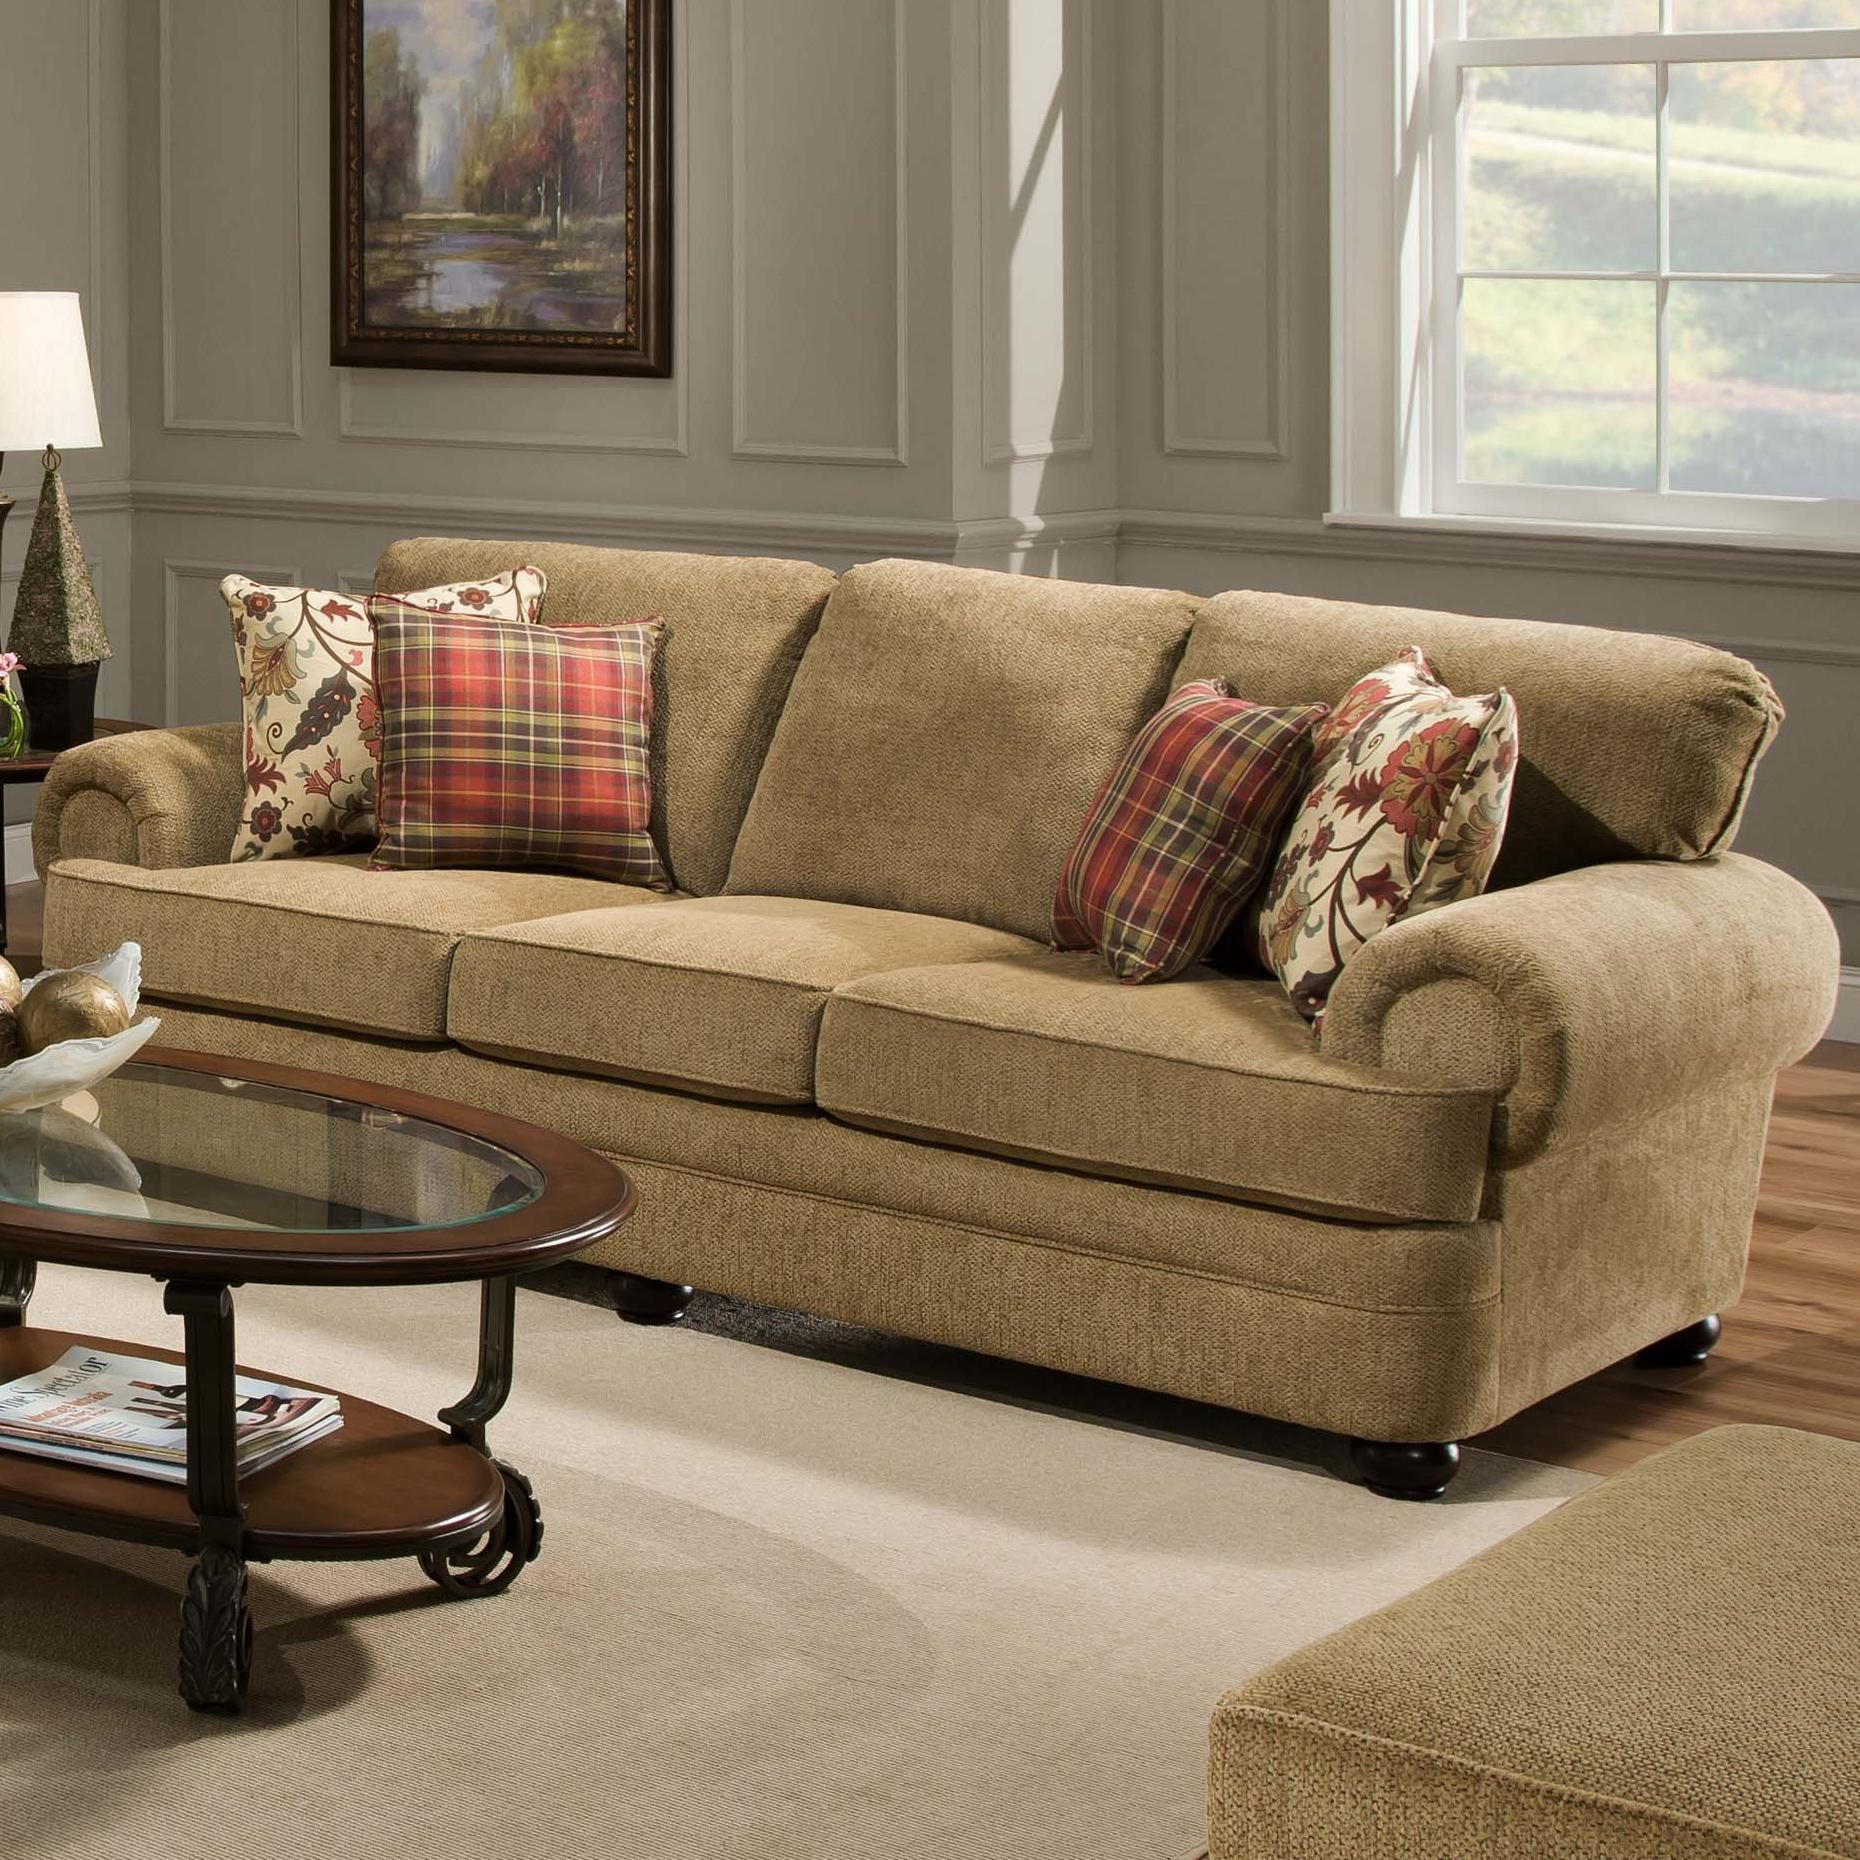 United Furniture Industries 7530 Traditional Three Seat Sofa With Within Traditional 3 Seater Sofas (Gallery 14 of 20)